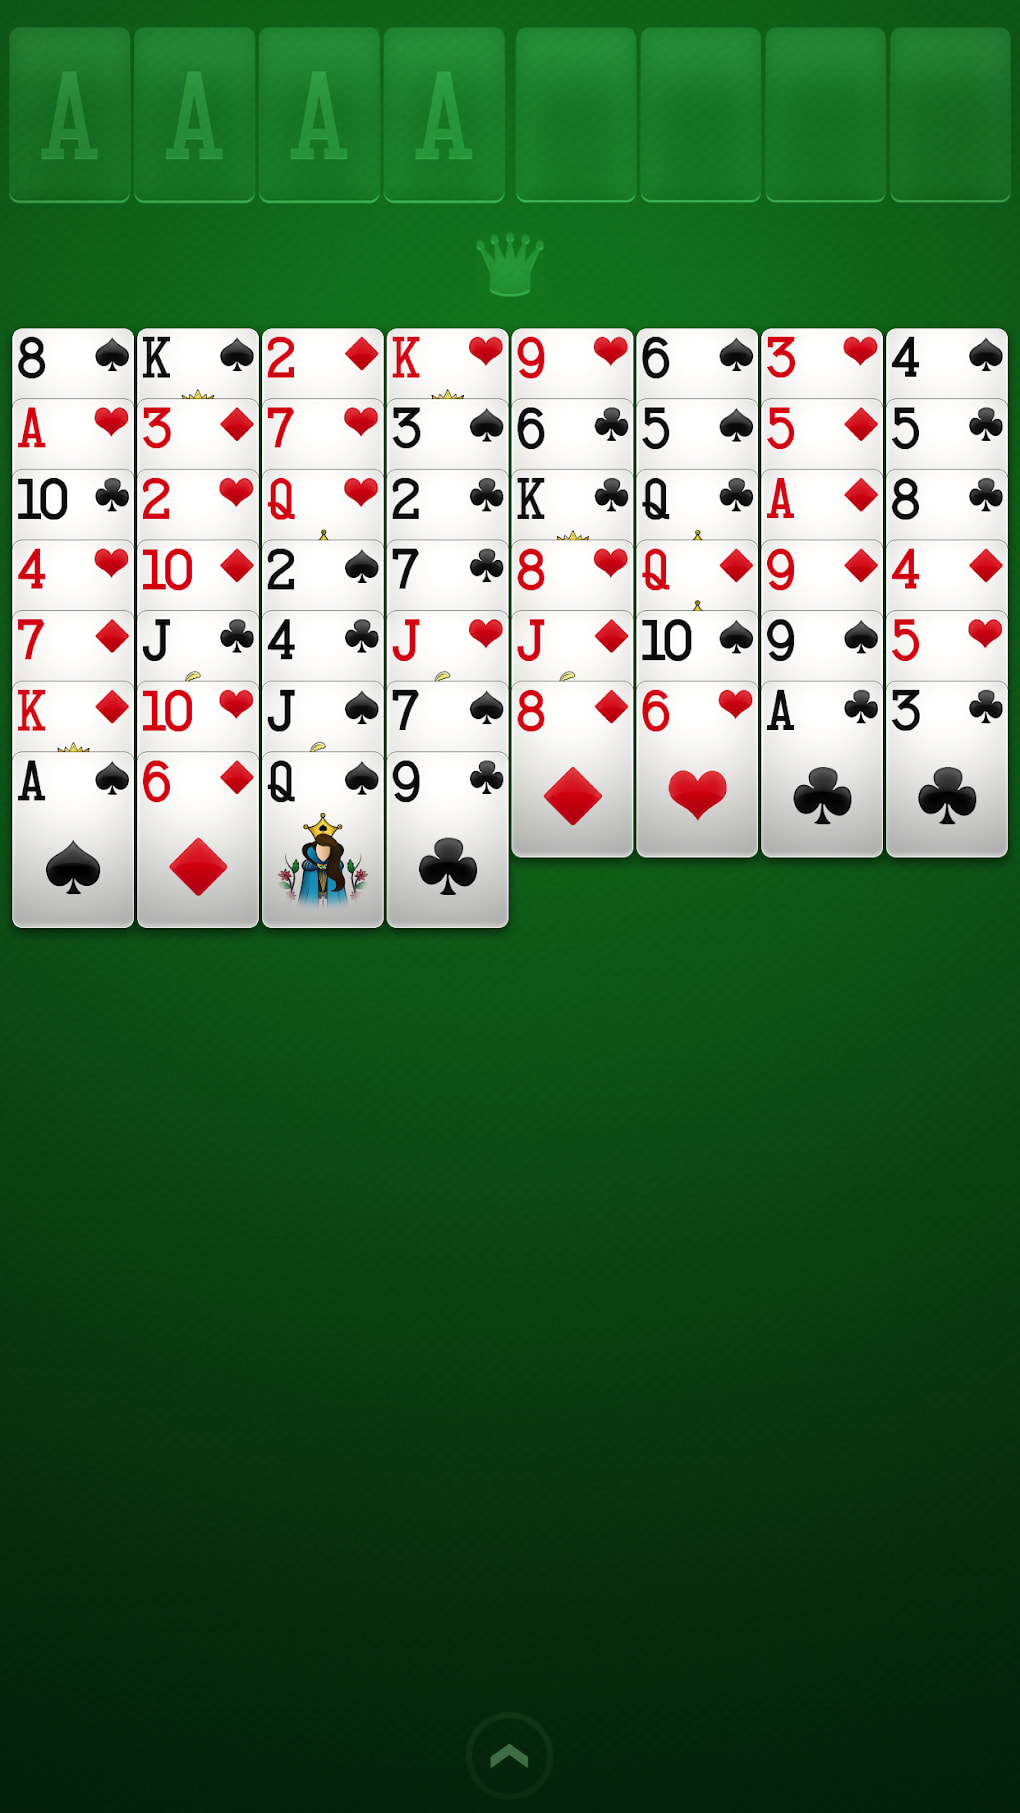 FreeCell Solitaire::Appstore for Android